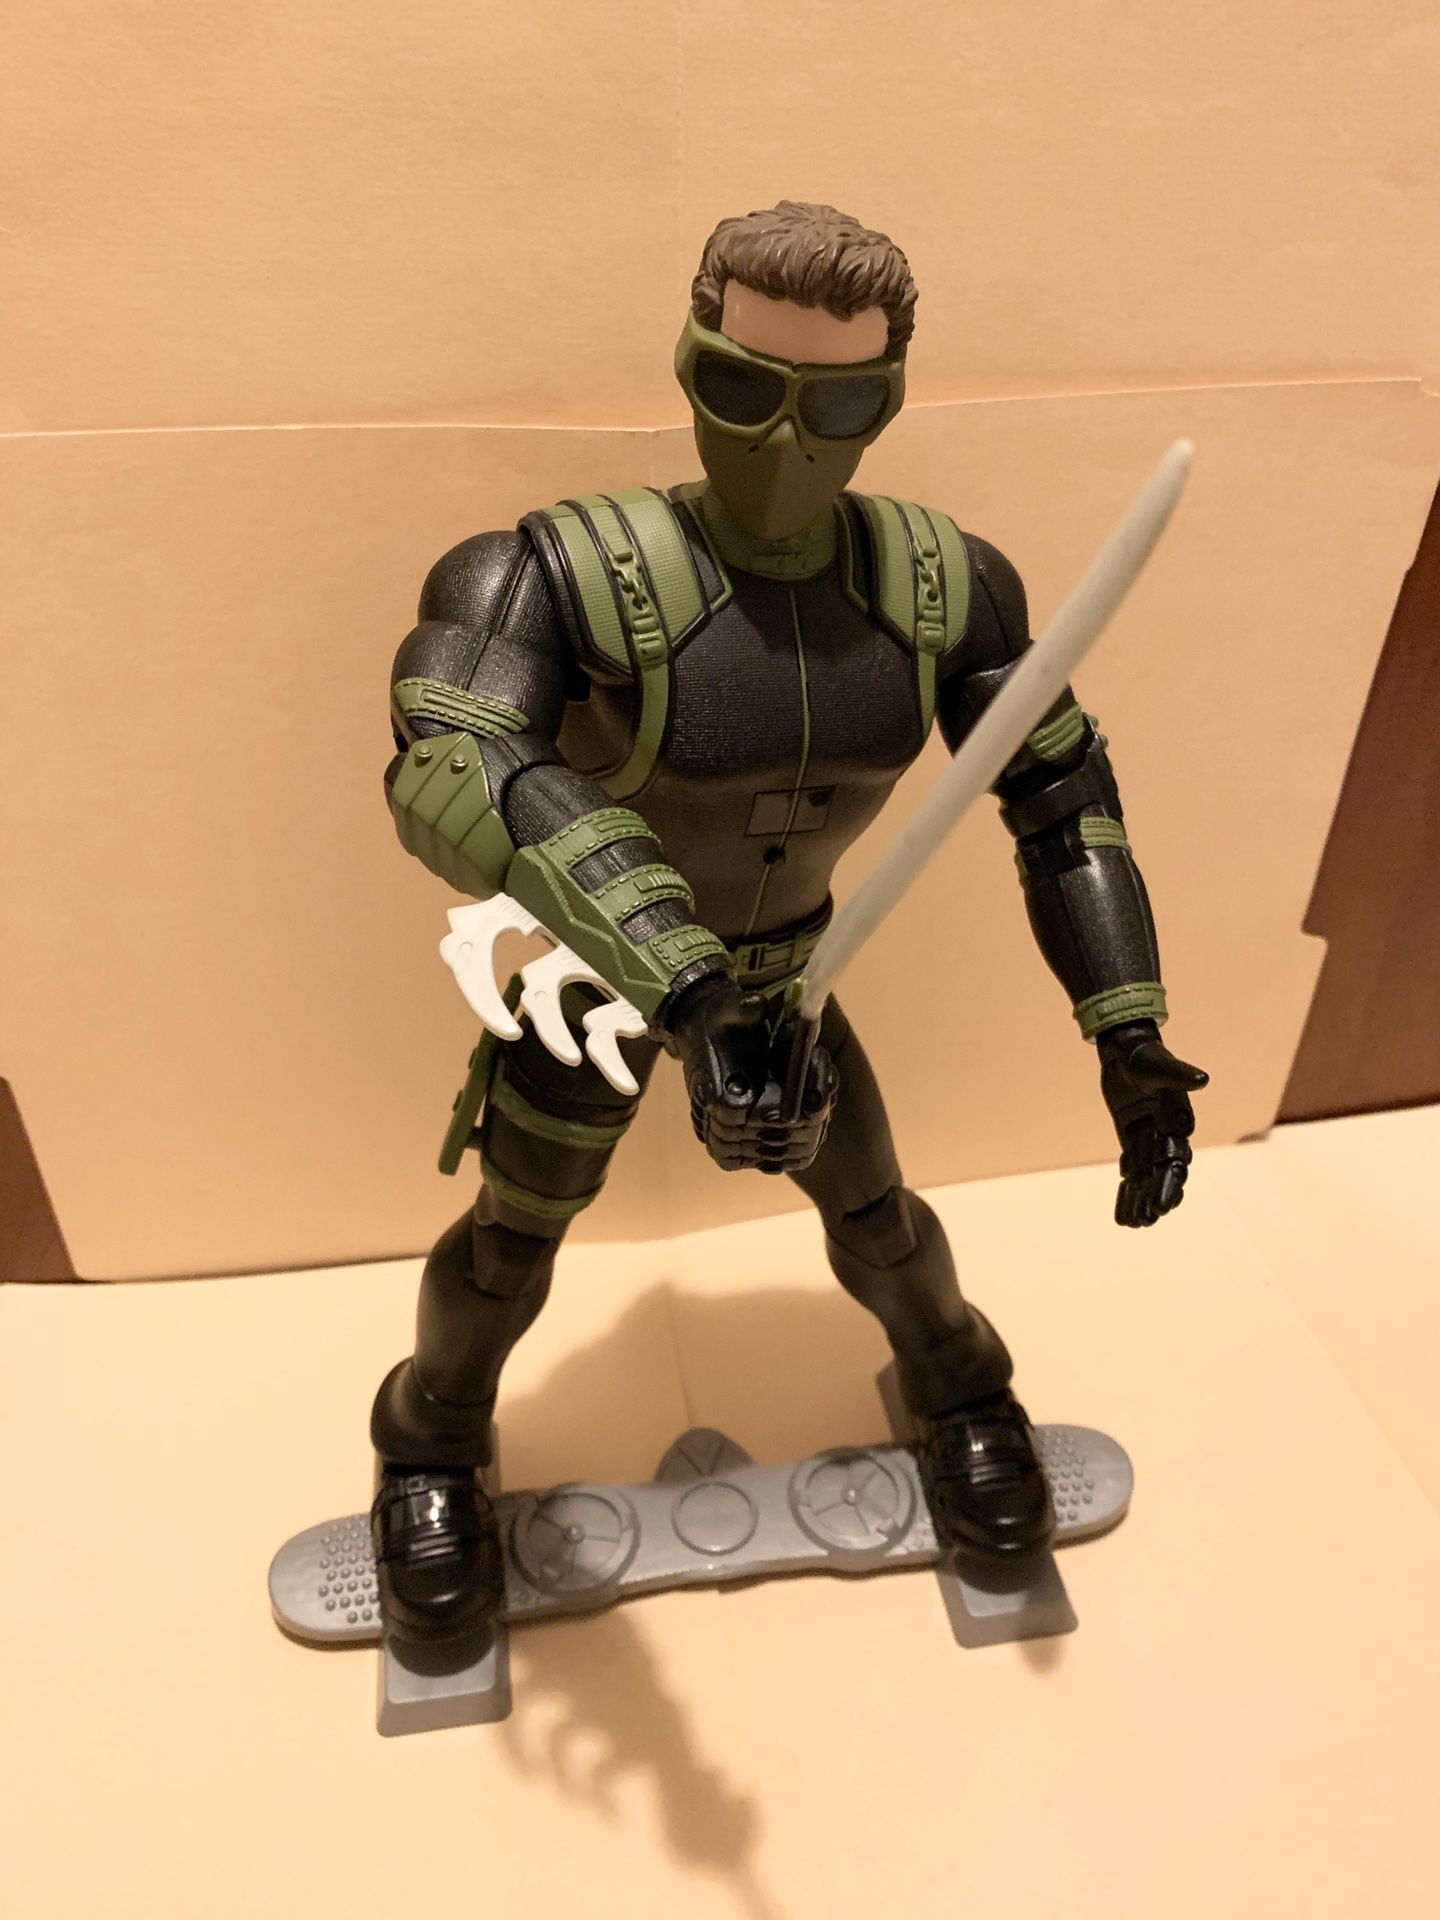 Spider-Man 3 Interactive Talking Green Goblin New Goblin Harry Osborn  action figure 14” action figure from Thinkway Toys for Sale in Yorktown, VA  - OfferUp